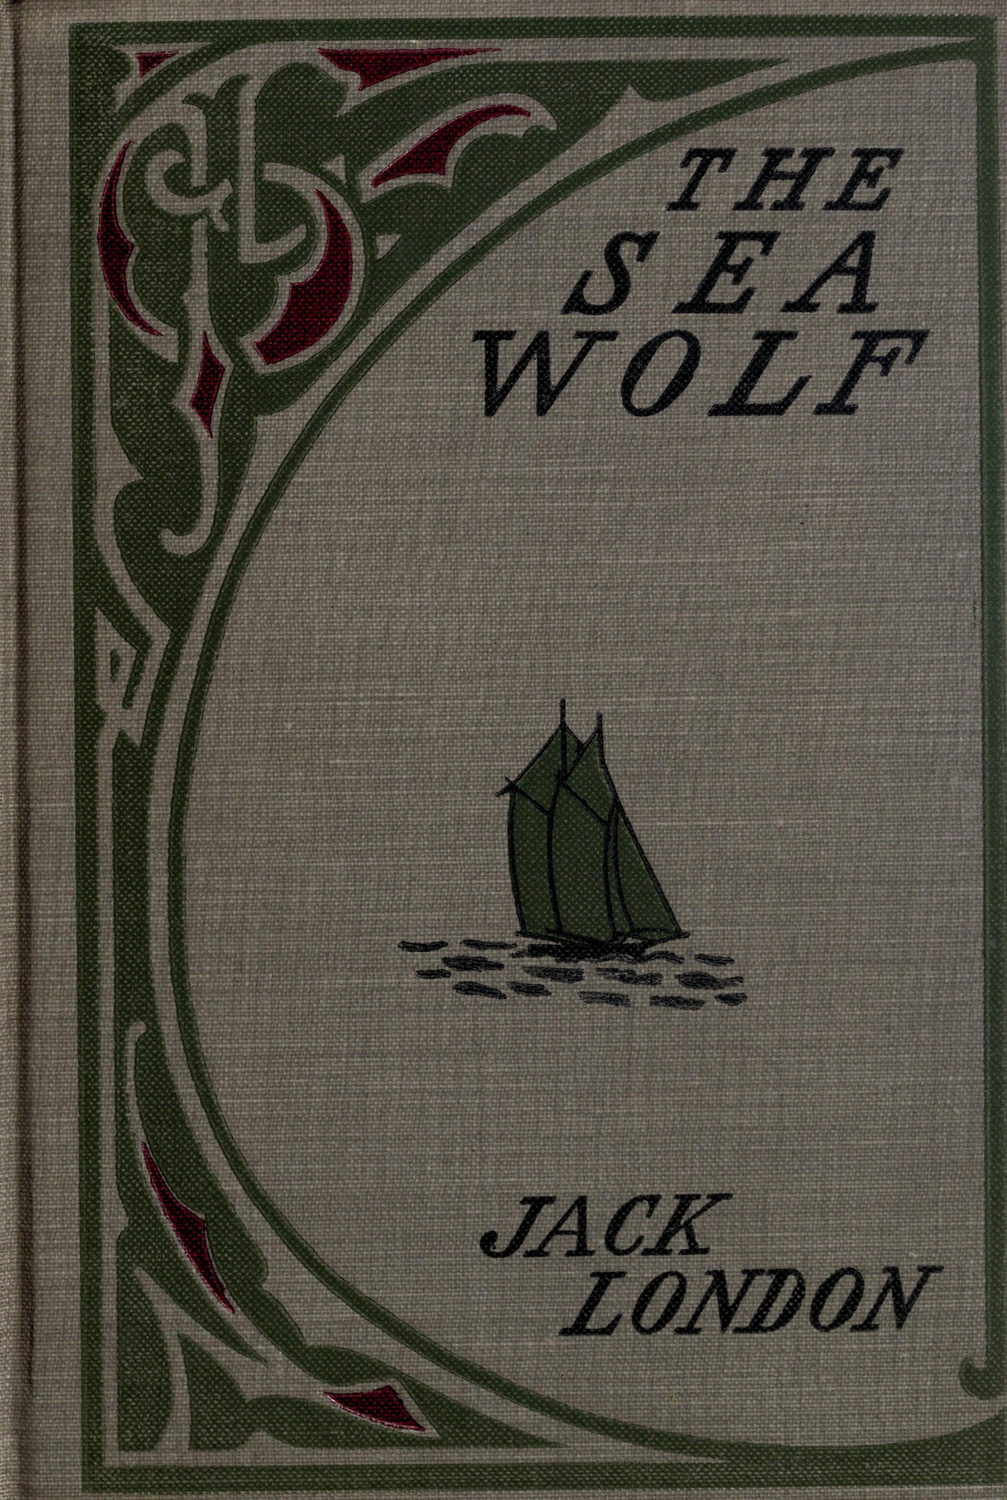 The Project Gutenberg eBook of The Sea-Wolf, by Jack London